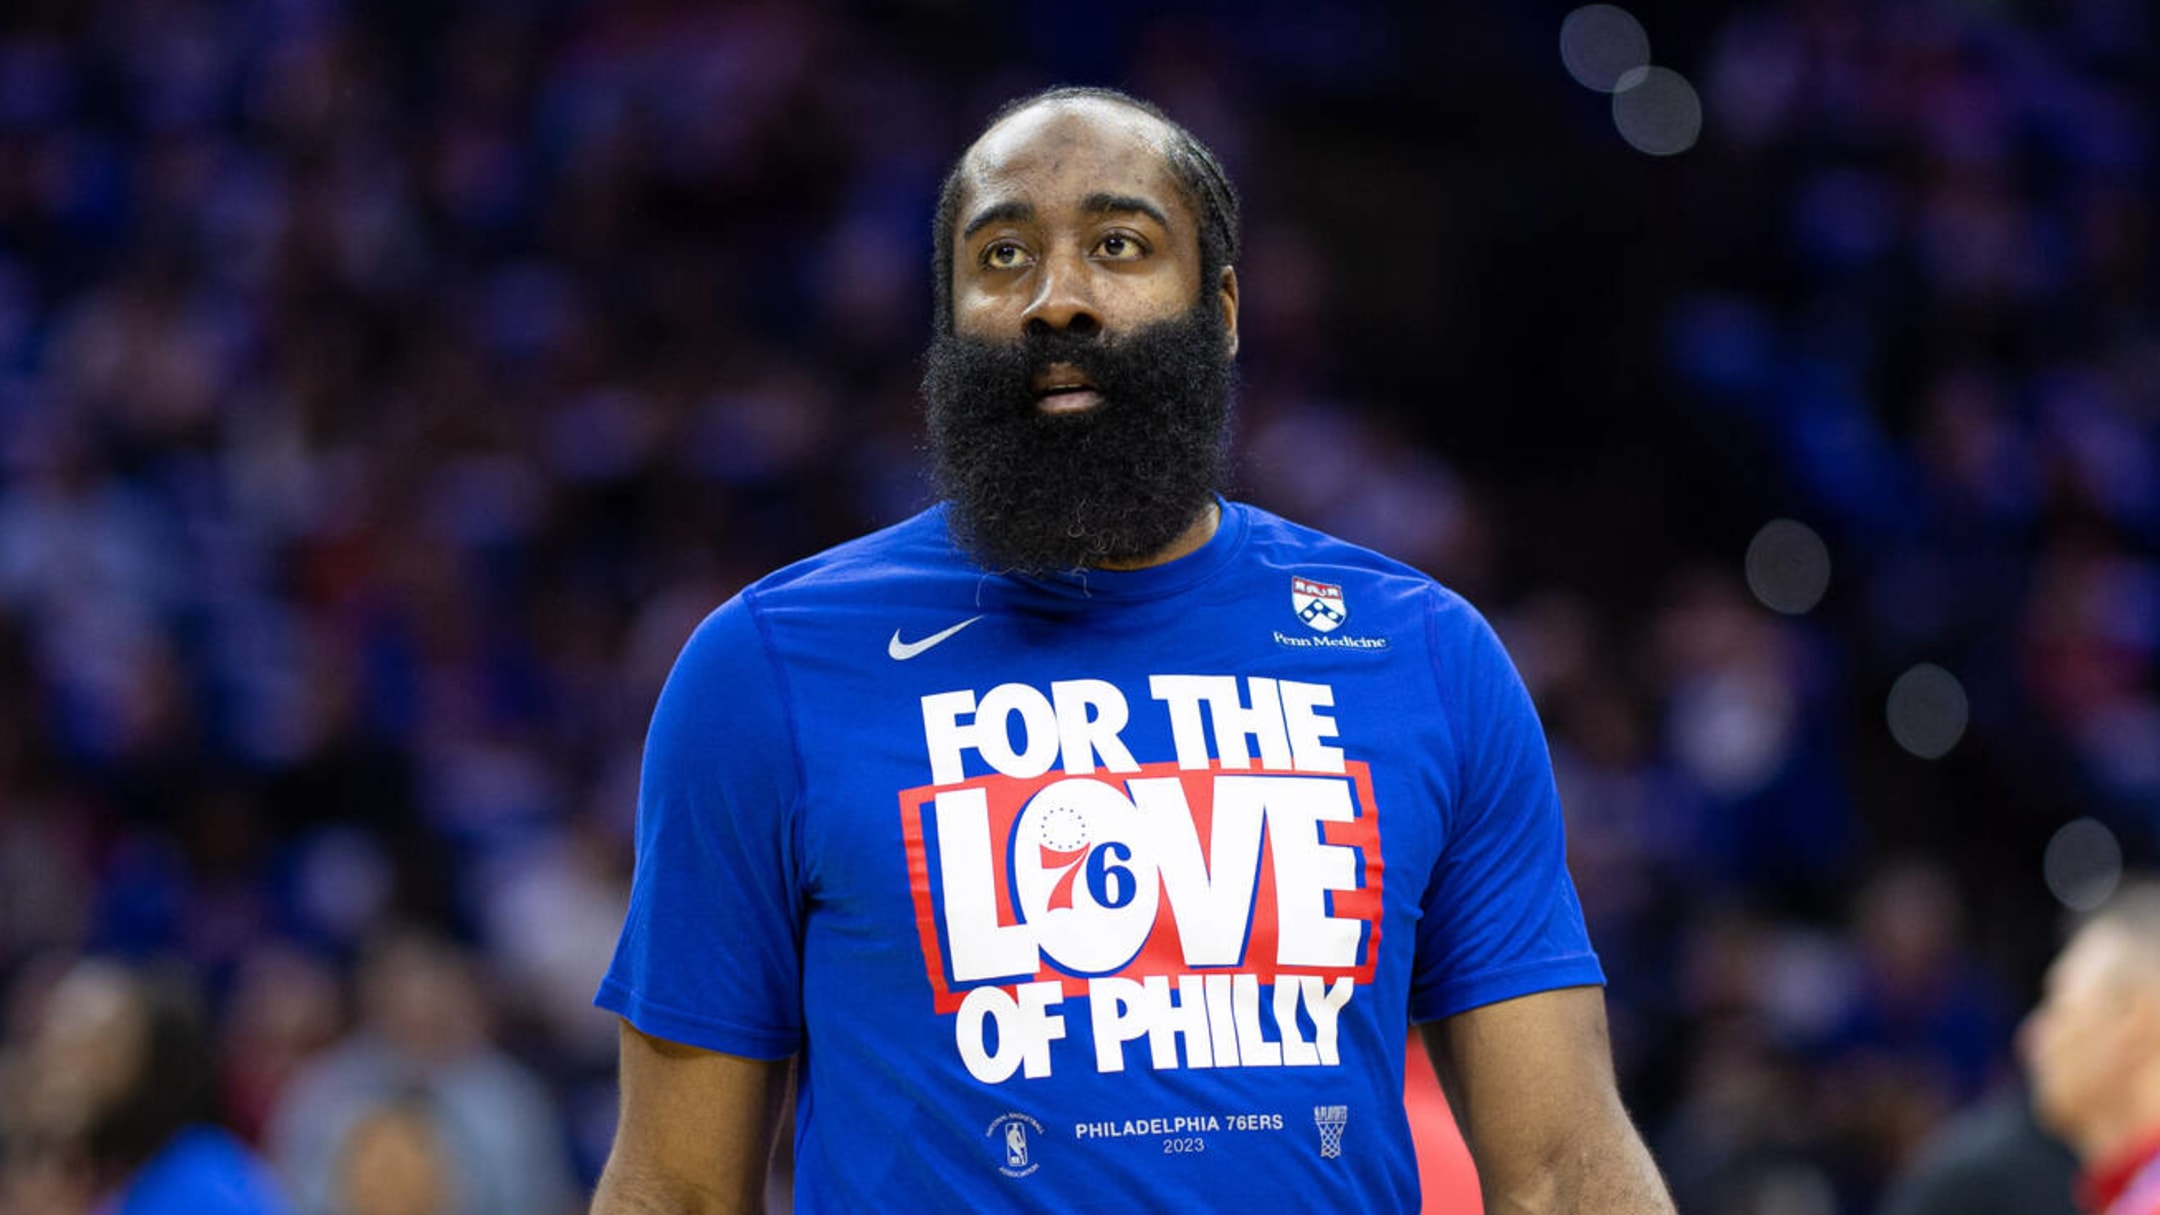 James Harden reportedly picking up $35.6M player option, will work